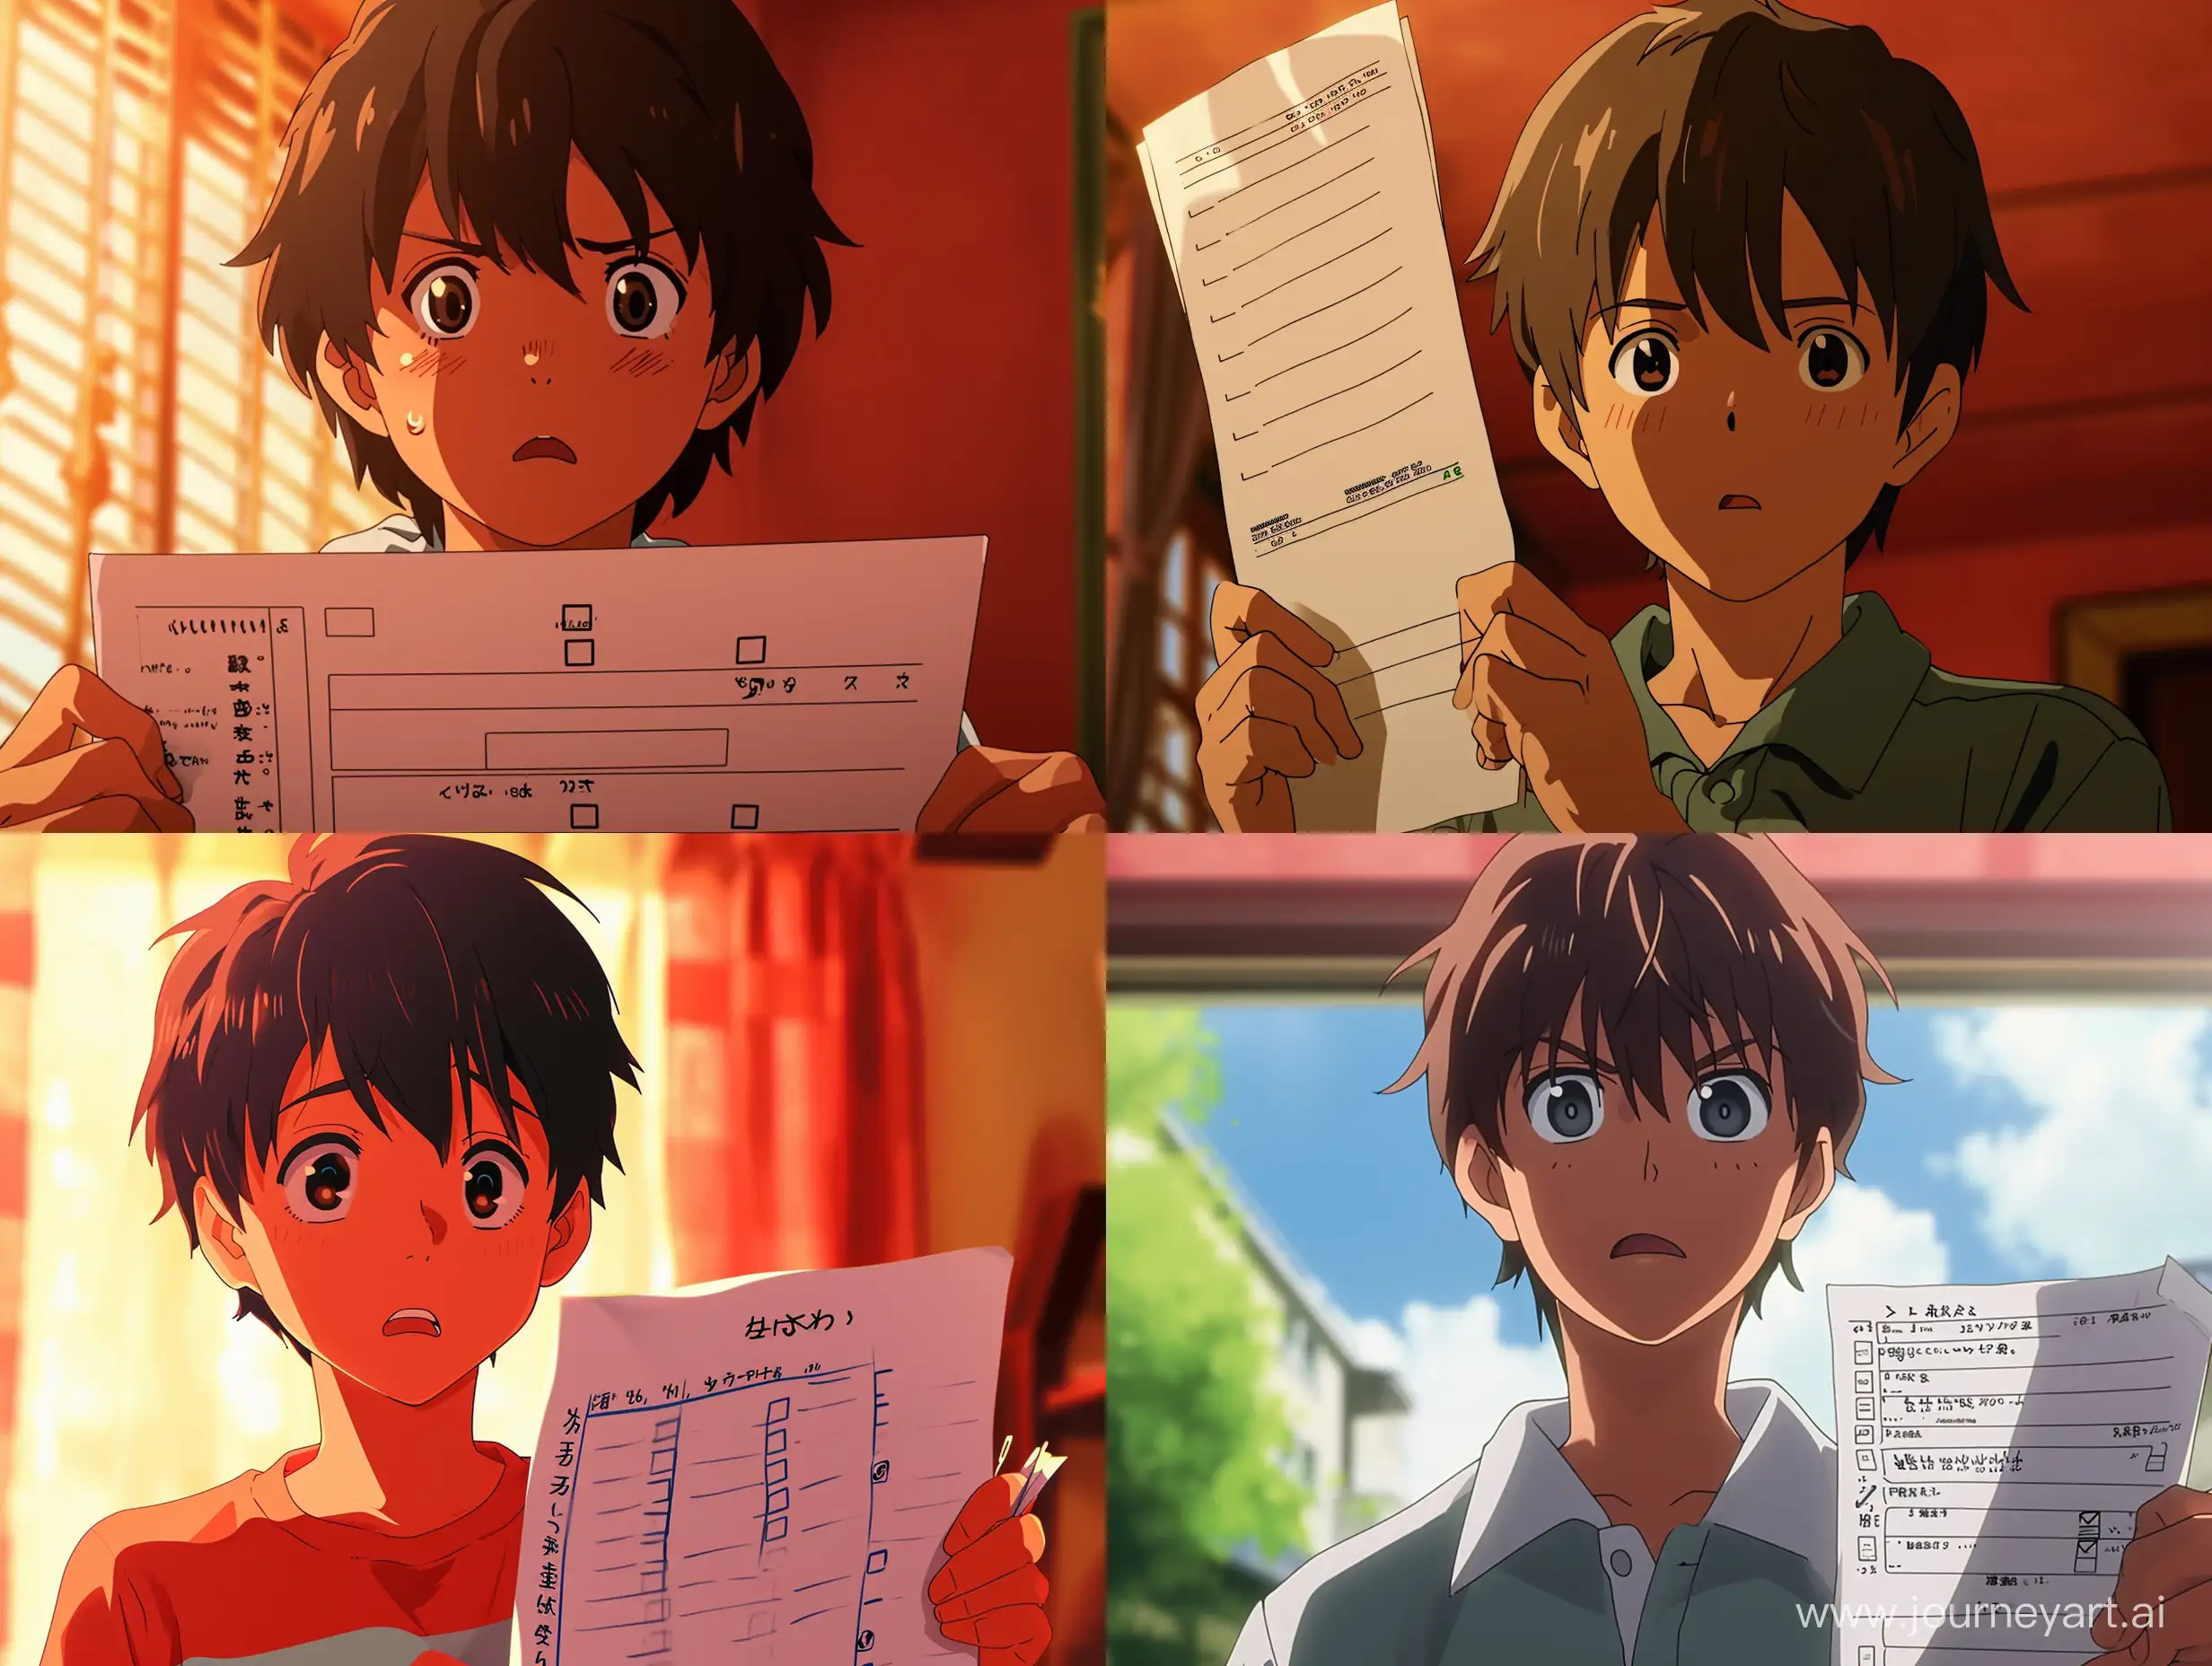 Disappointed-Anime-Boy-with-Low-Test-Score